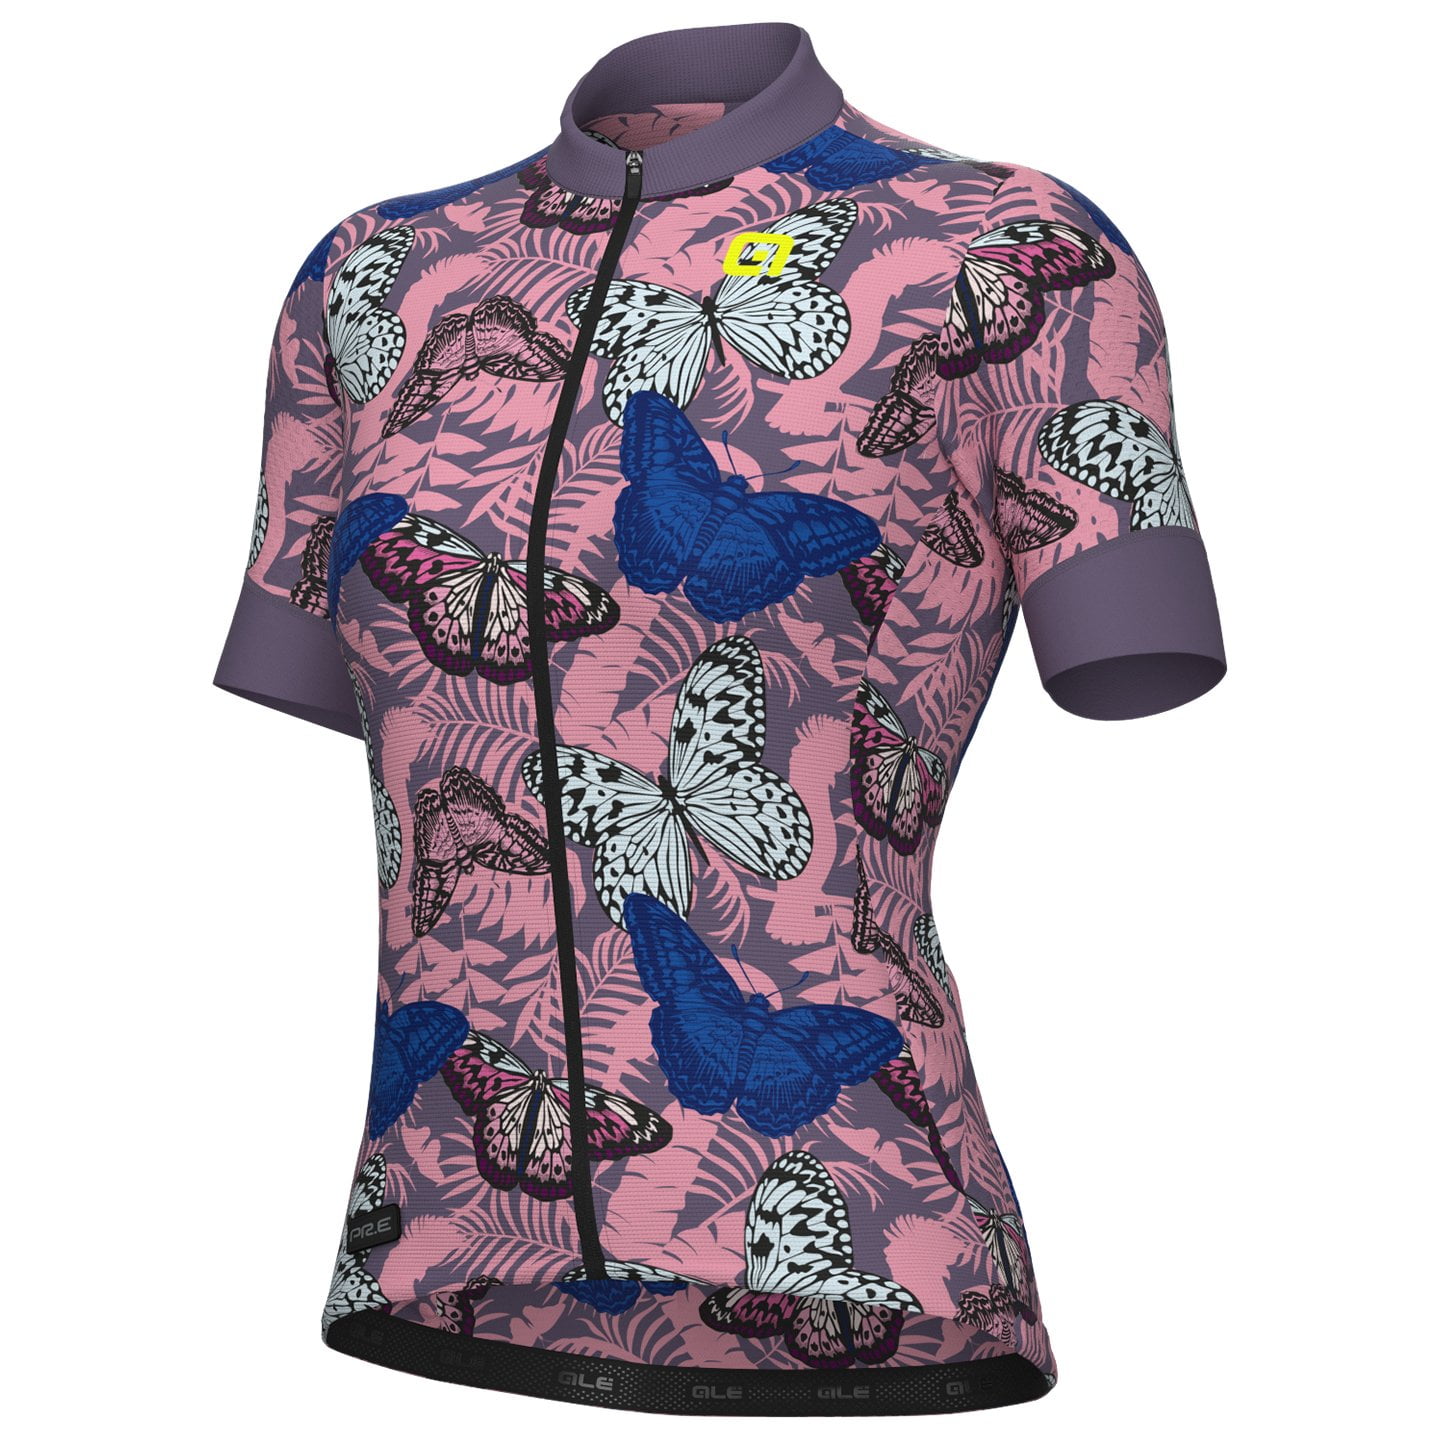 ALE Vanessa Women’s Jersey Women’s Short Sleeve Jersey, size M, Cycling jersey, Cycle clothing